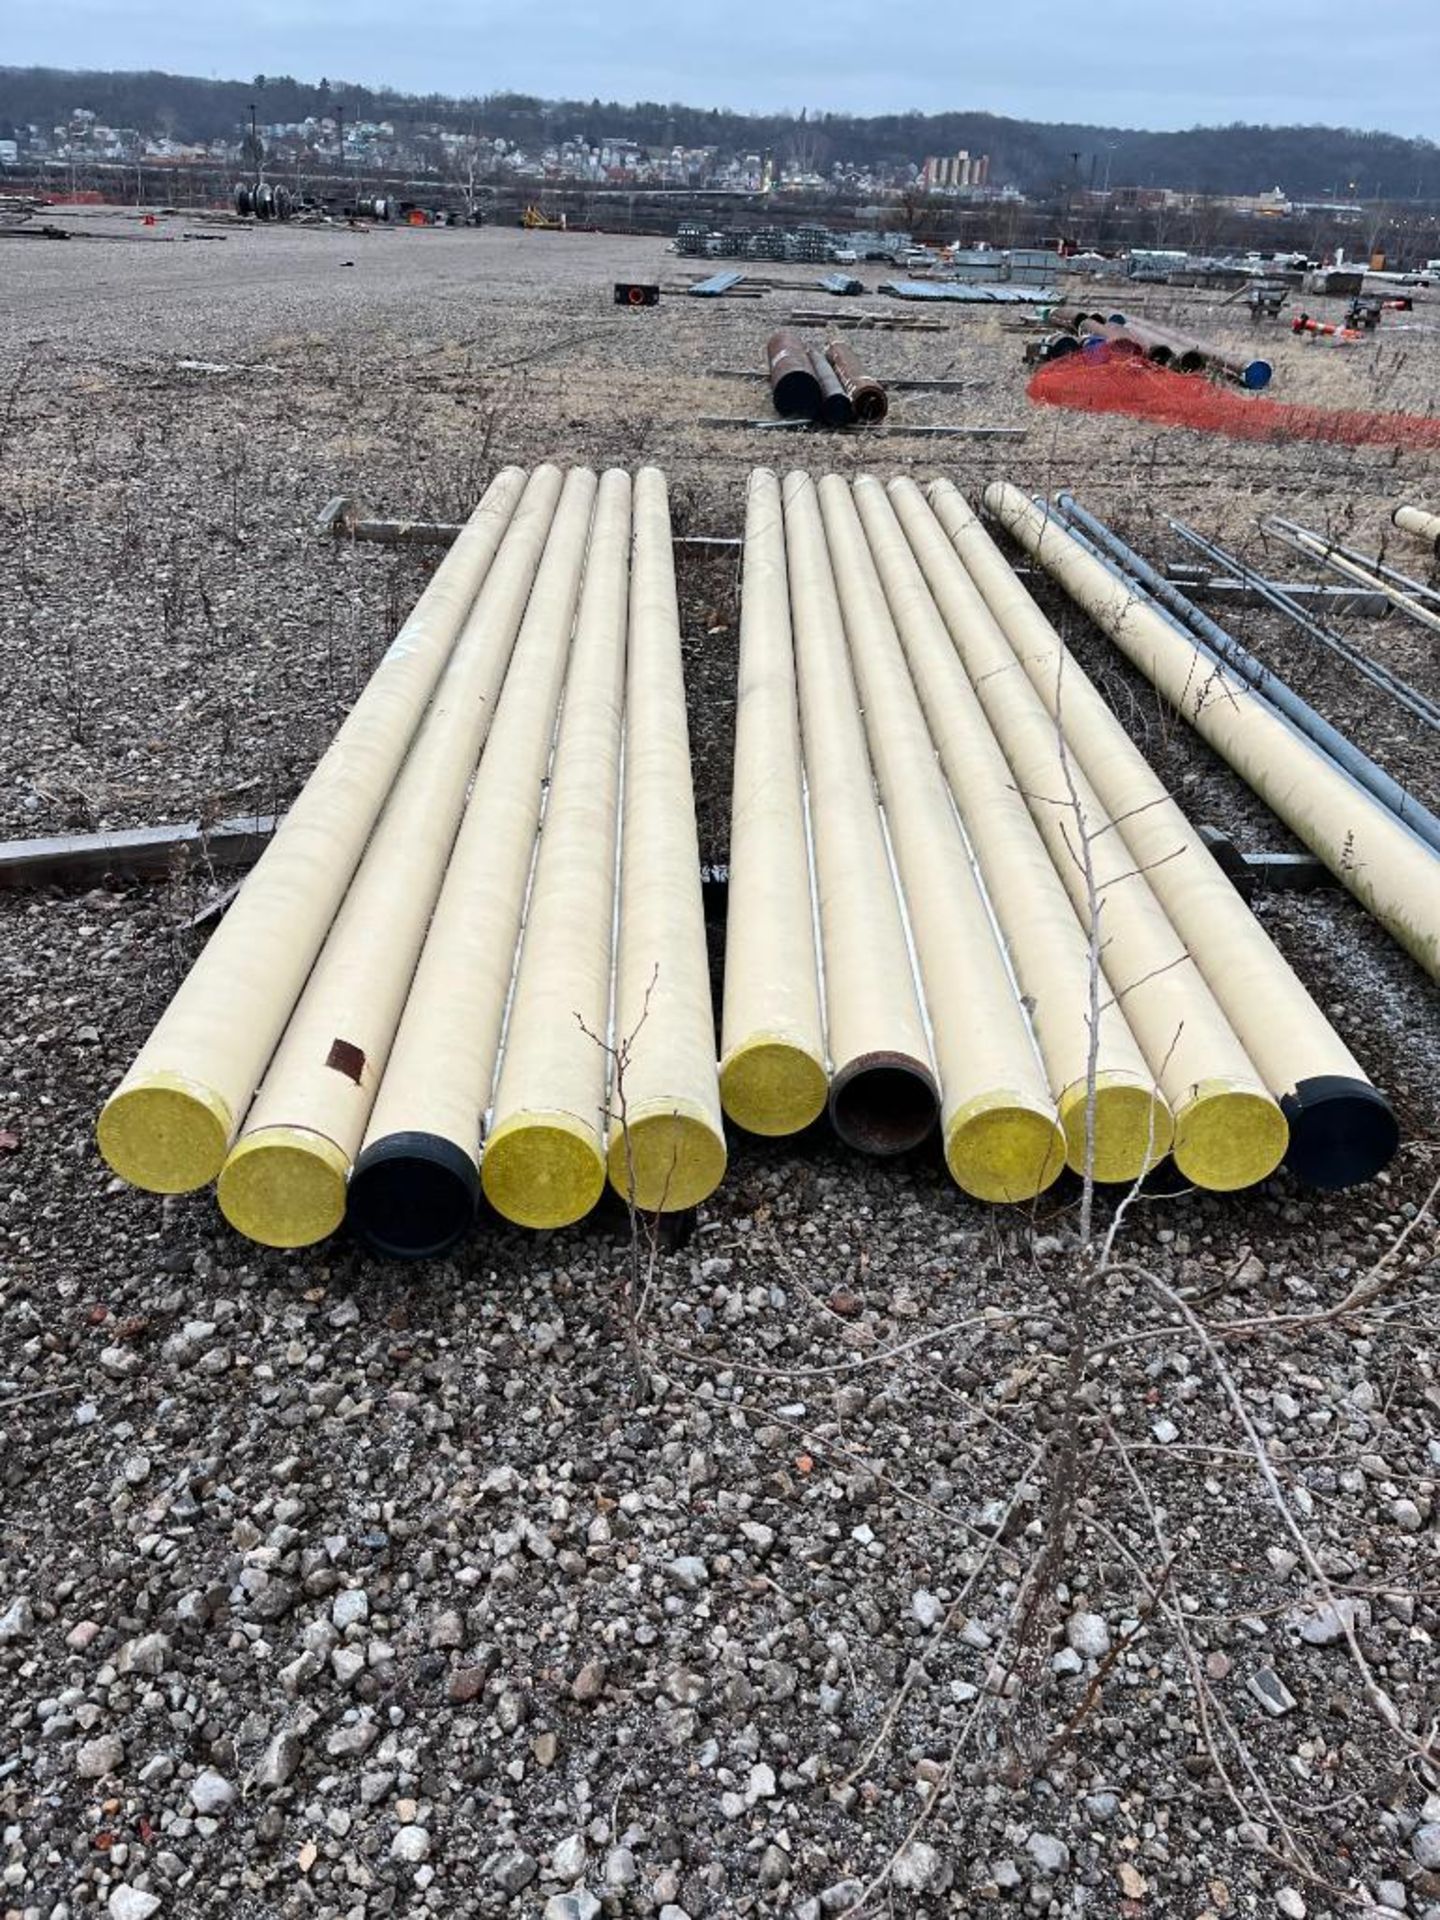 Coated Steel Pipe, 6" x 20', (1) Stainless 8" x 12', (3) Assorted Size Steel Pipes - Image 3 of 4